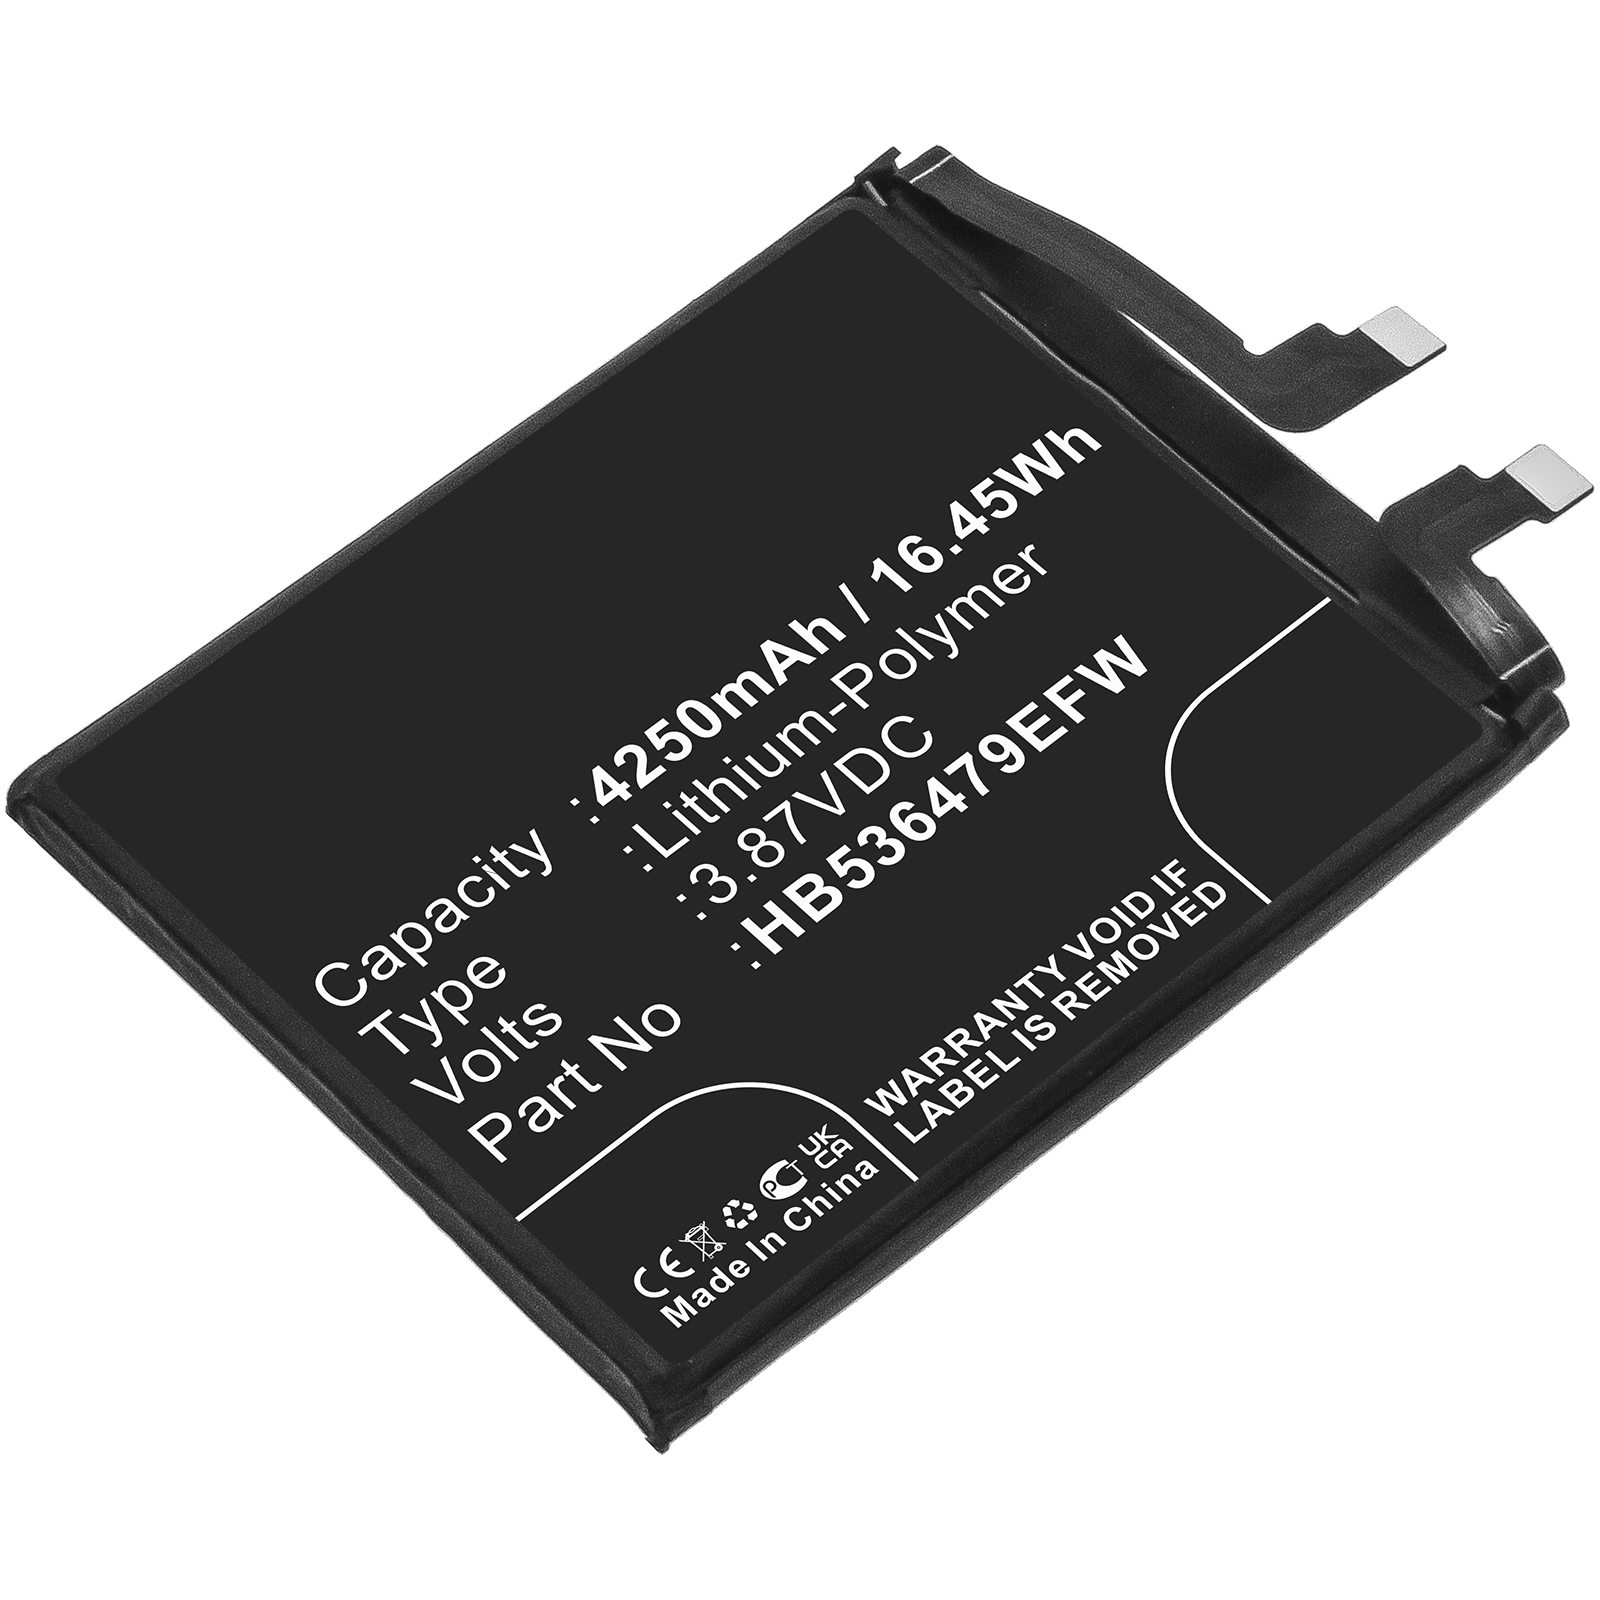 Synergy Digital Cell Phone Battery, Compatible with Huawei HB536479EFW Cell Phone Battery (Li-Pol, 3.87V, 4250mAh)